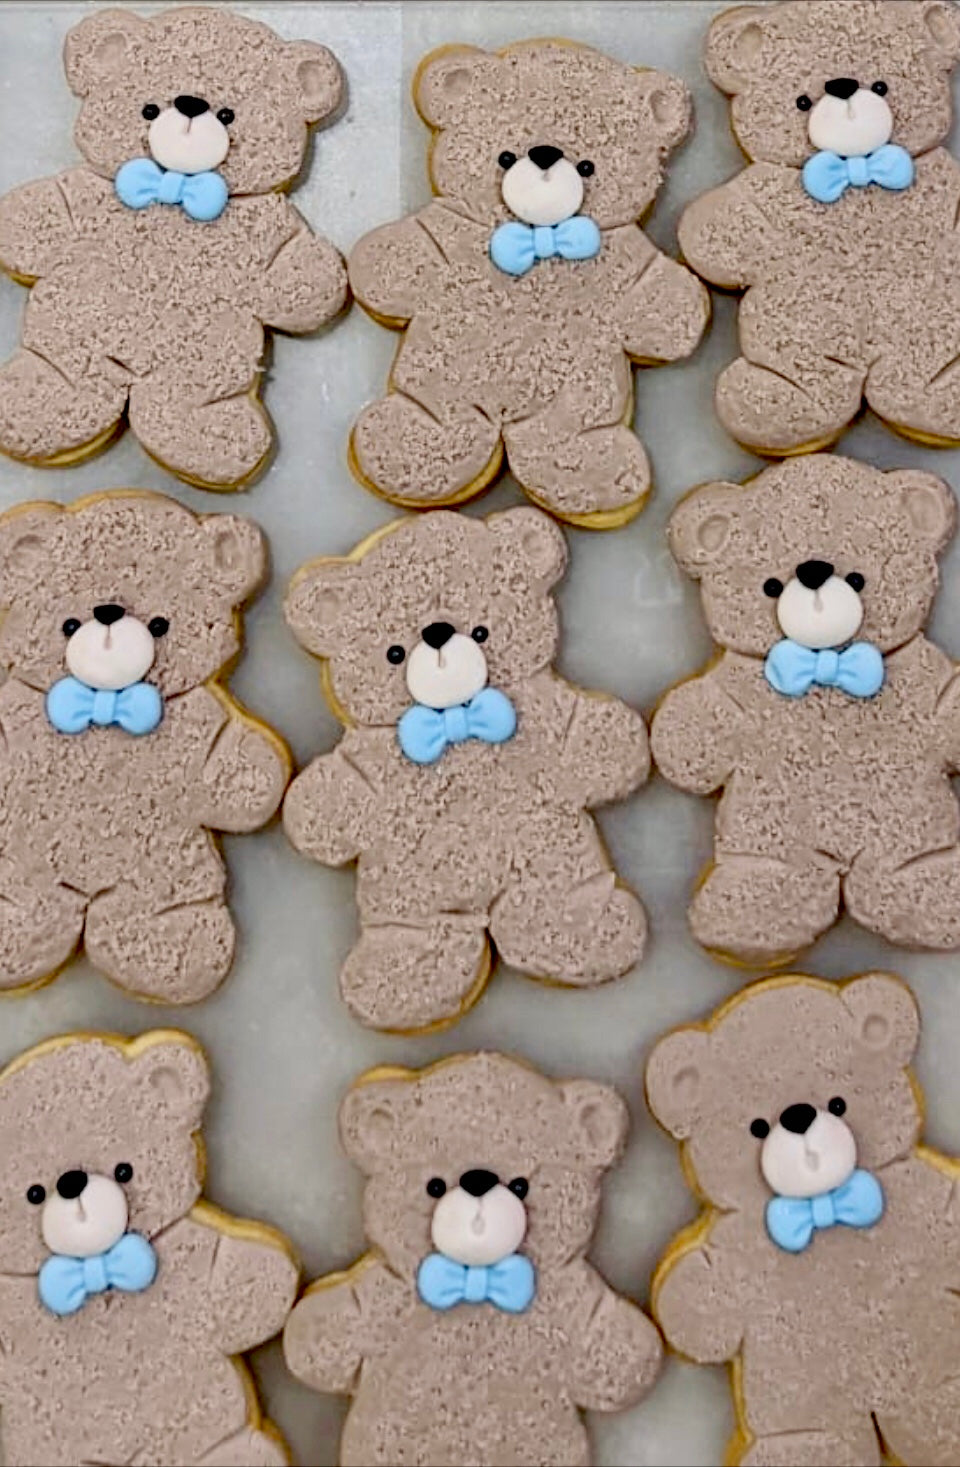 Teddy bear biscuits